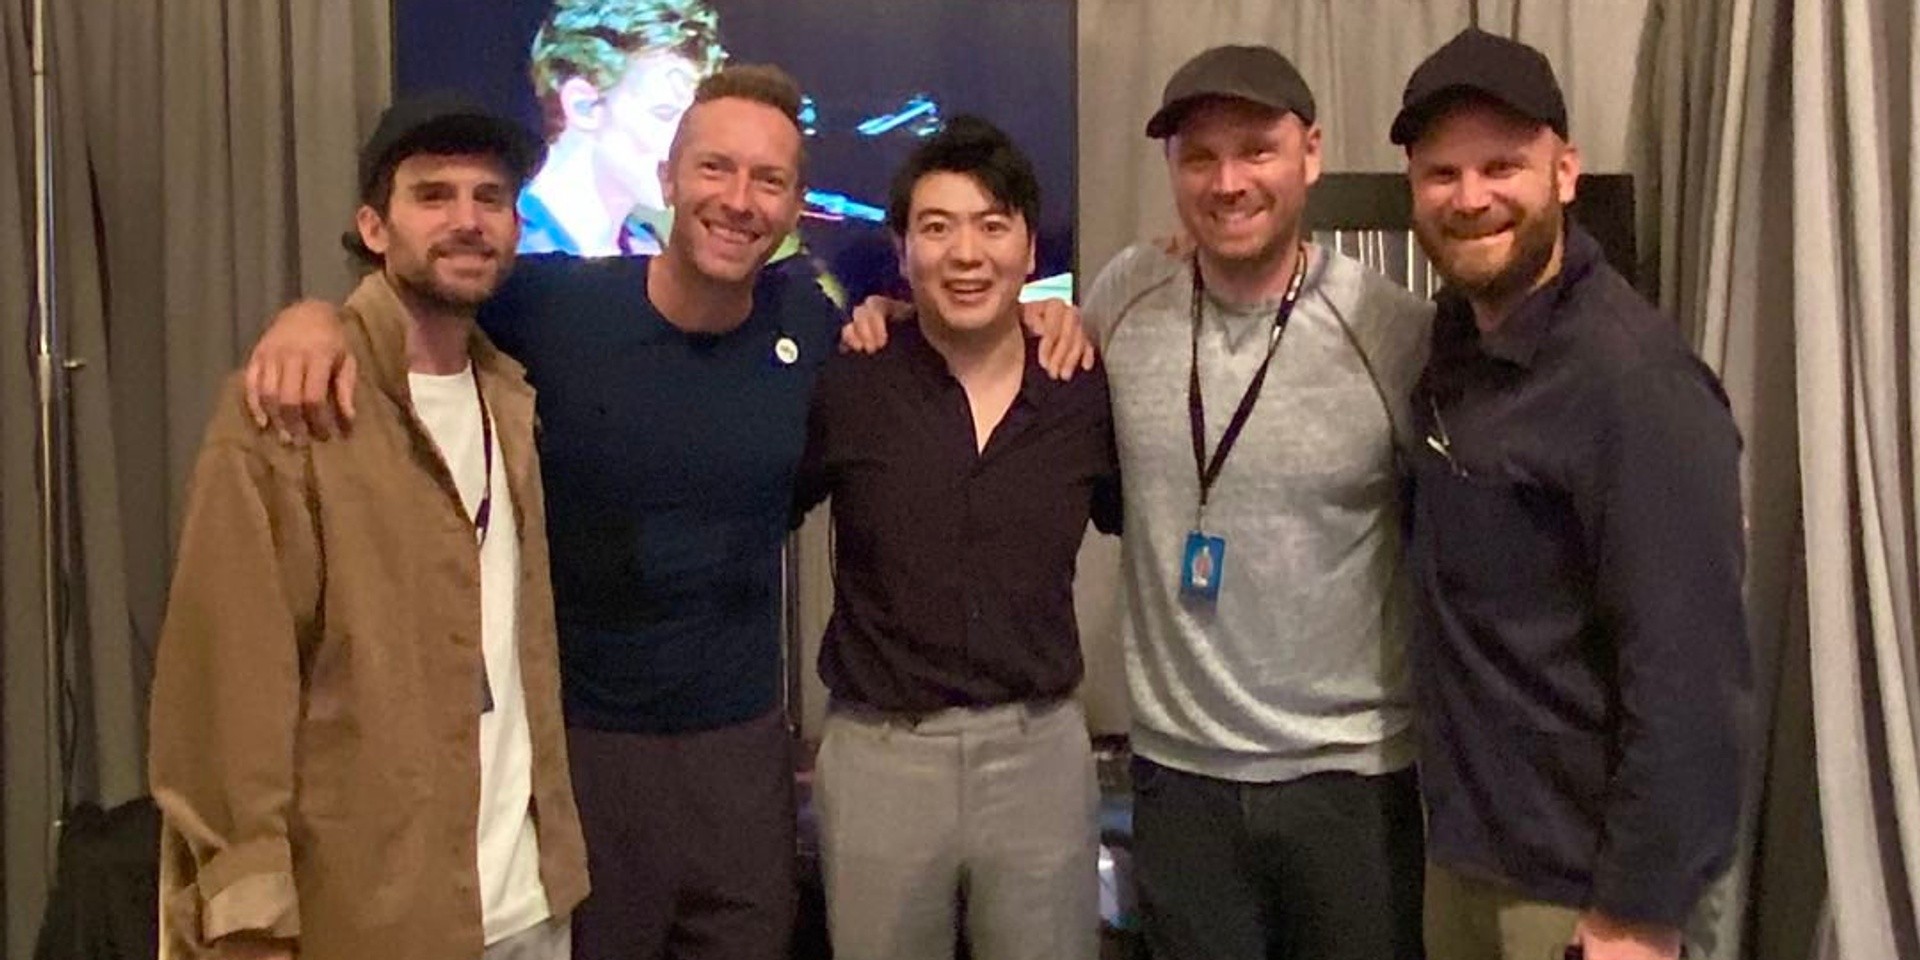 Chinese classical pianist Lang Lang joins Coldplay to perform 'Clocks' at Global Citizen Live 2021